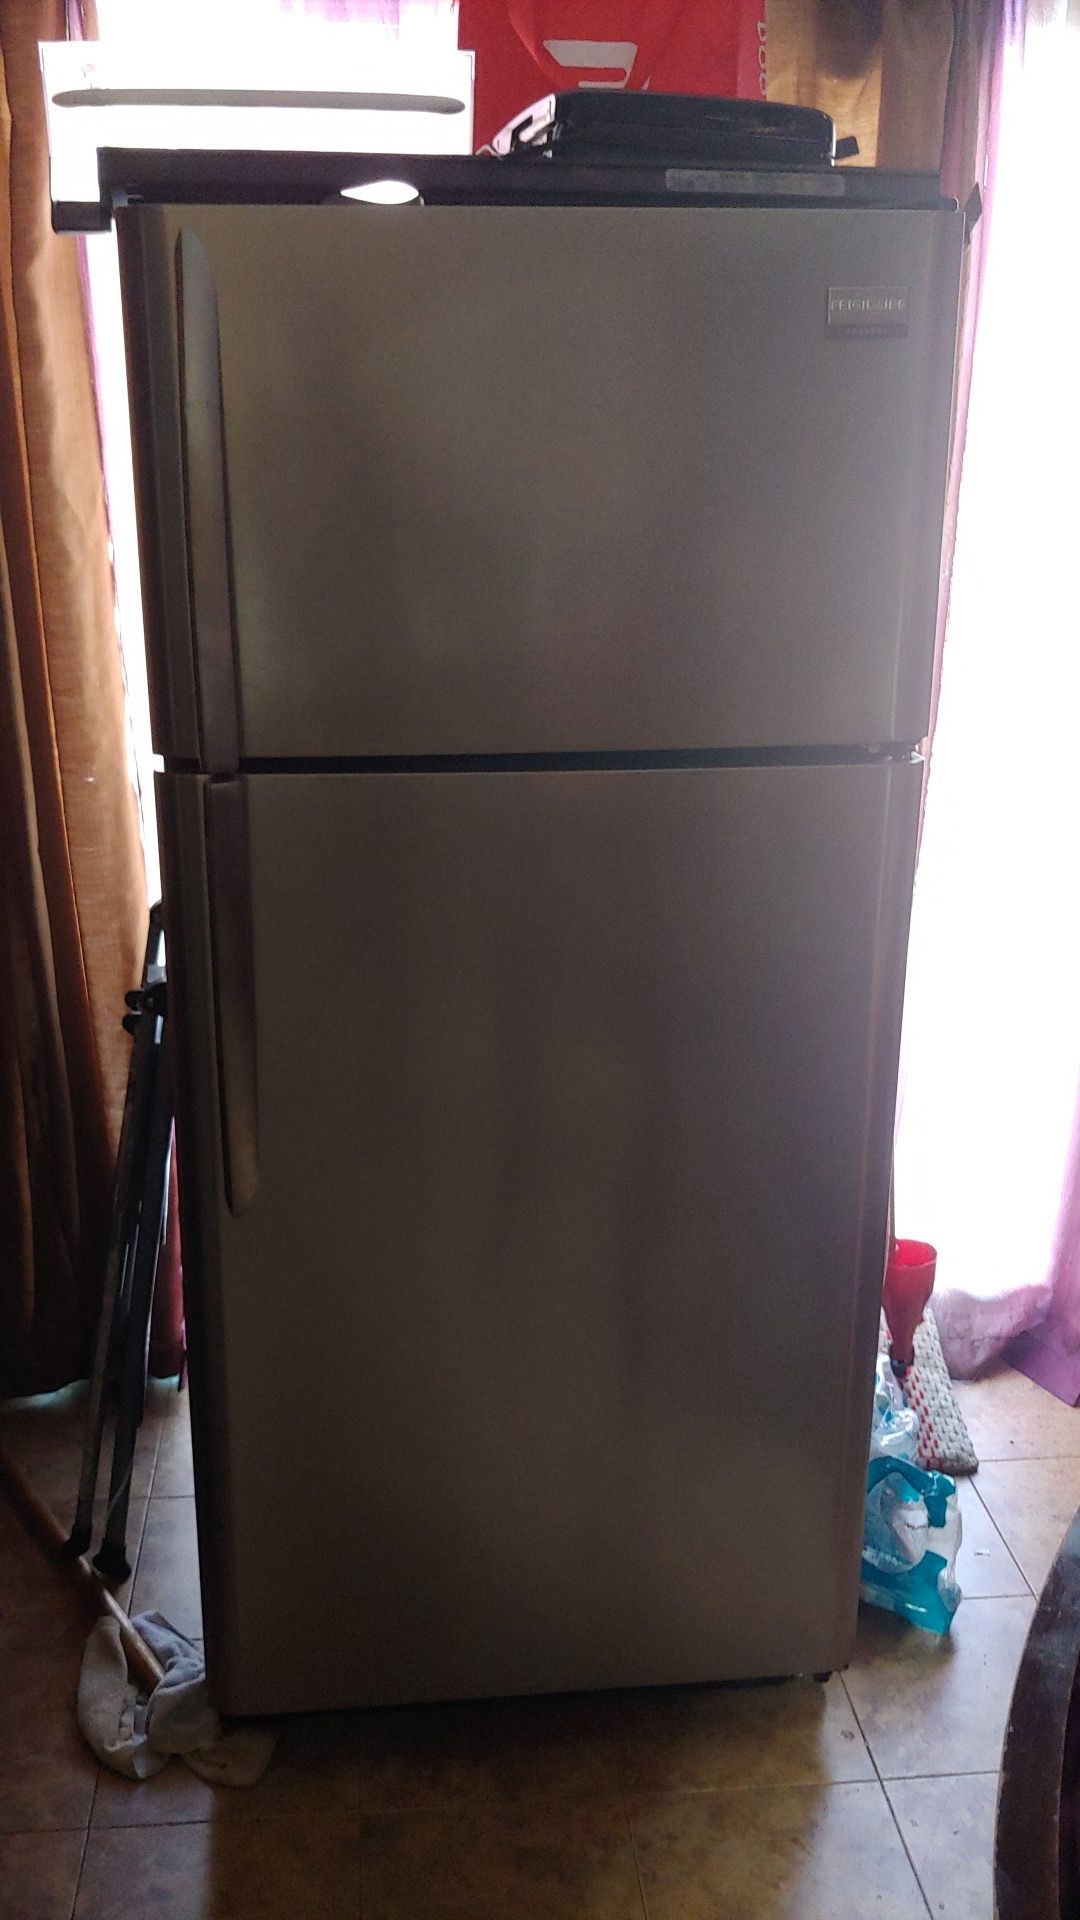 Free refrigerator whoever wants it come get it I need to come by today cuz I bought another one